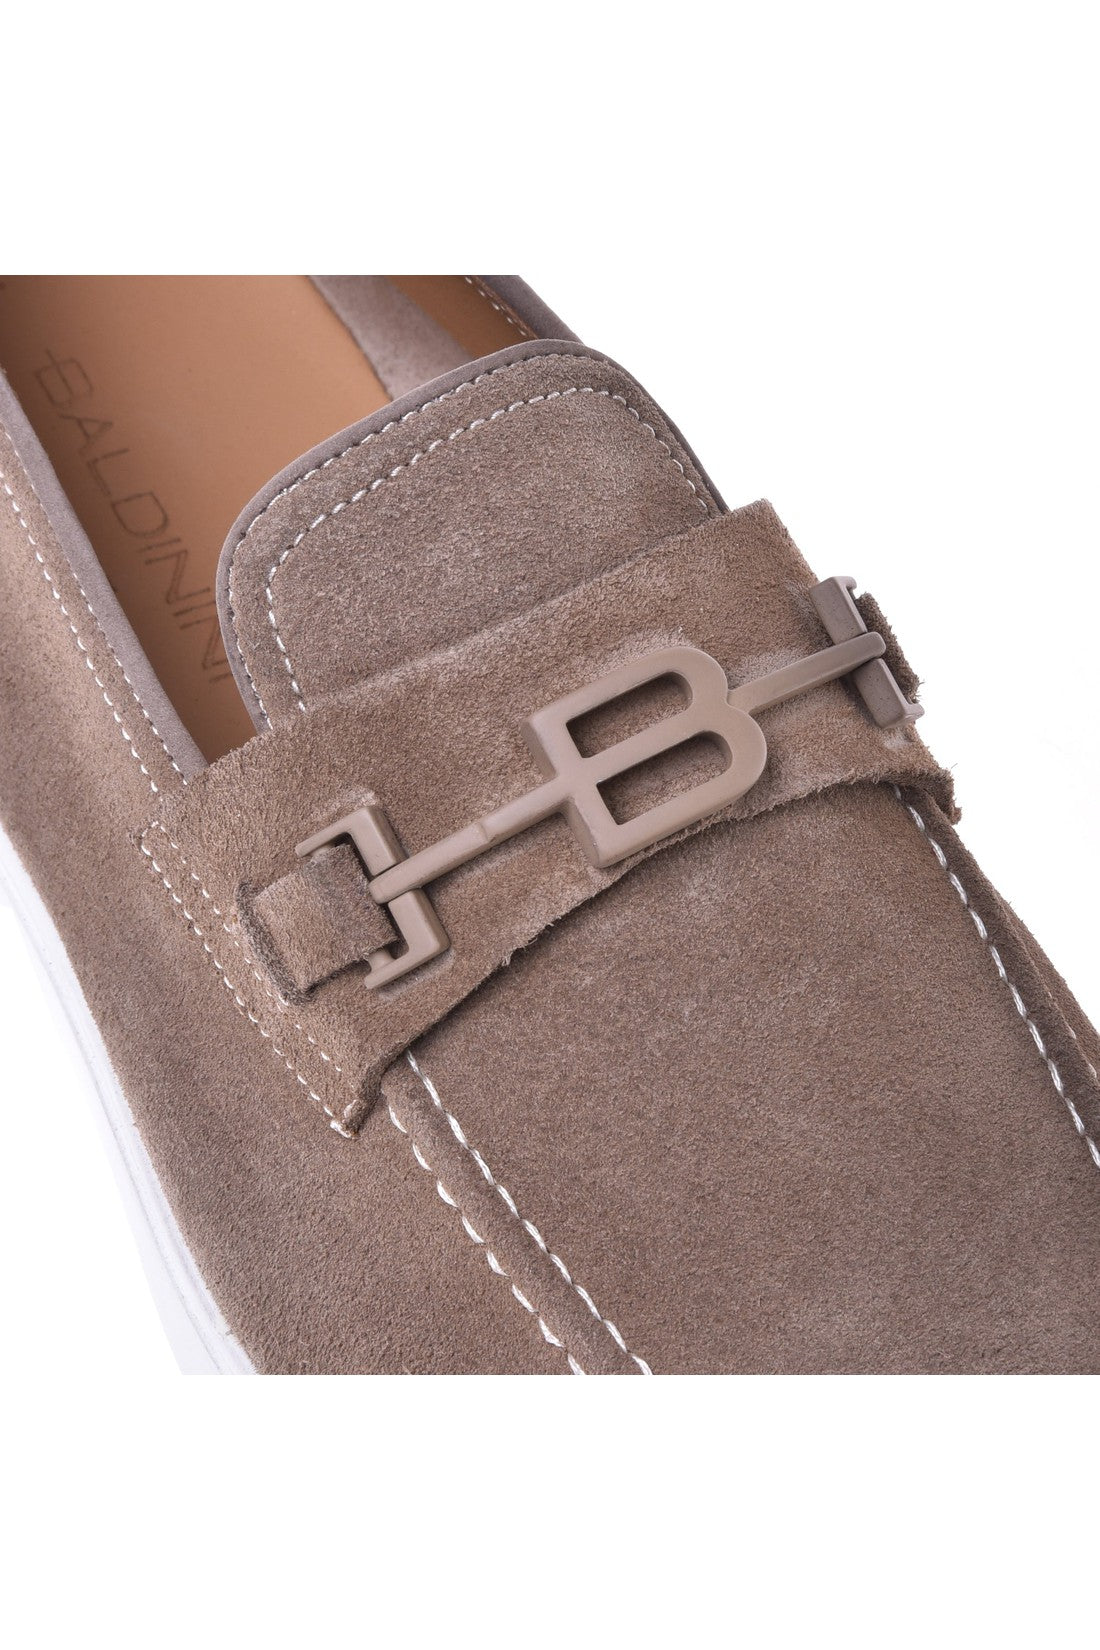 Loafer in taupe suede leather